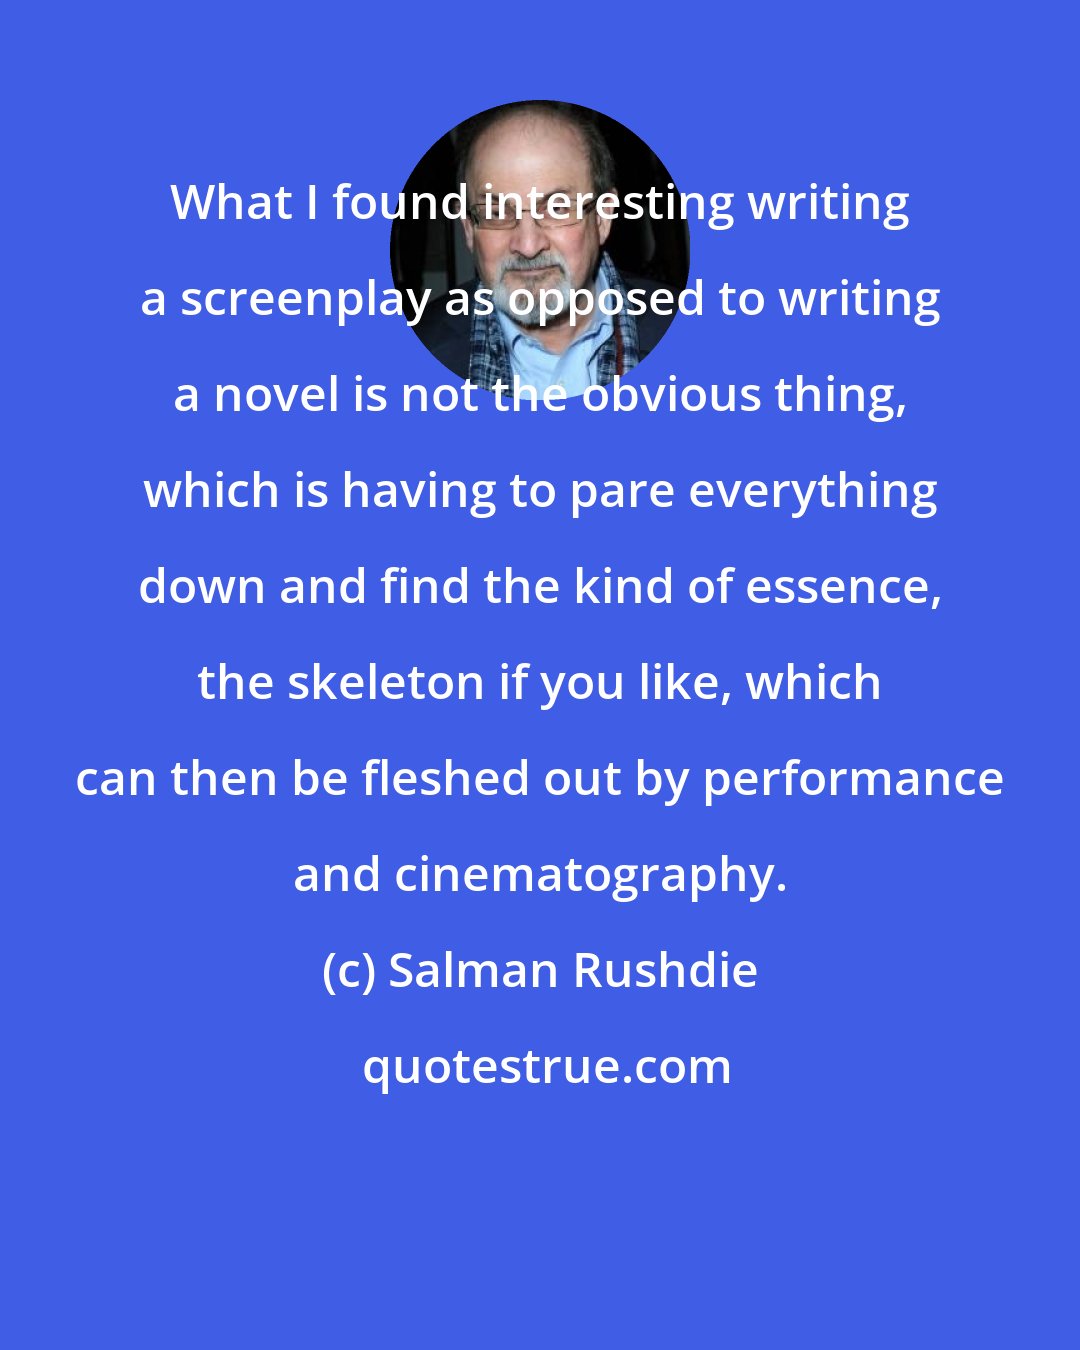 Salman Rushdie: What I found interesting writing a screenplay as opposed to writing a novel is not the obvious thing, which is having to pare everything down and find the kind of essence, the skeleton if you like, which can then be fleshed out by performance and cinematography.